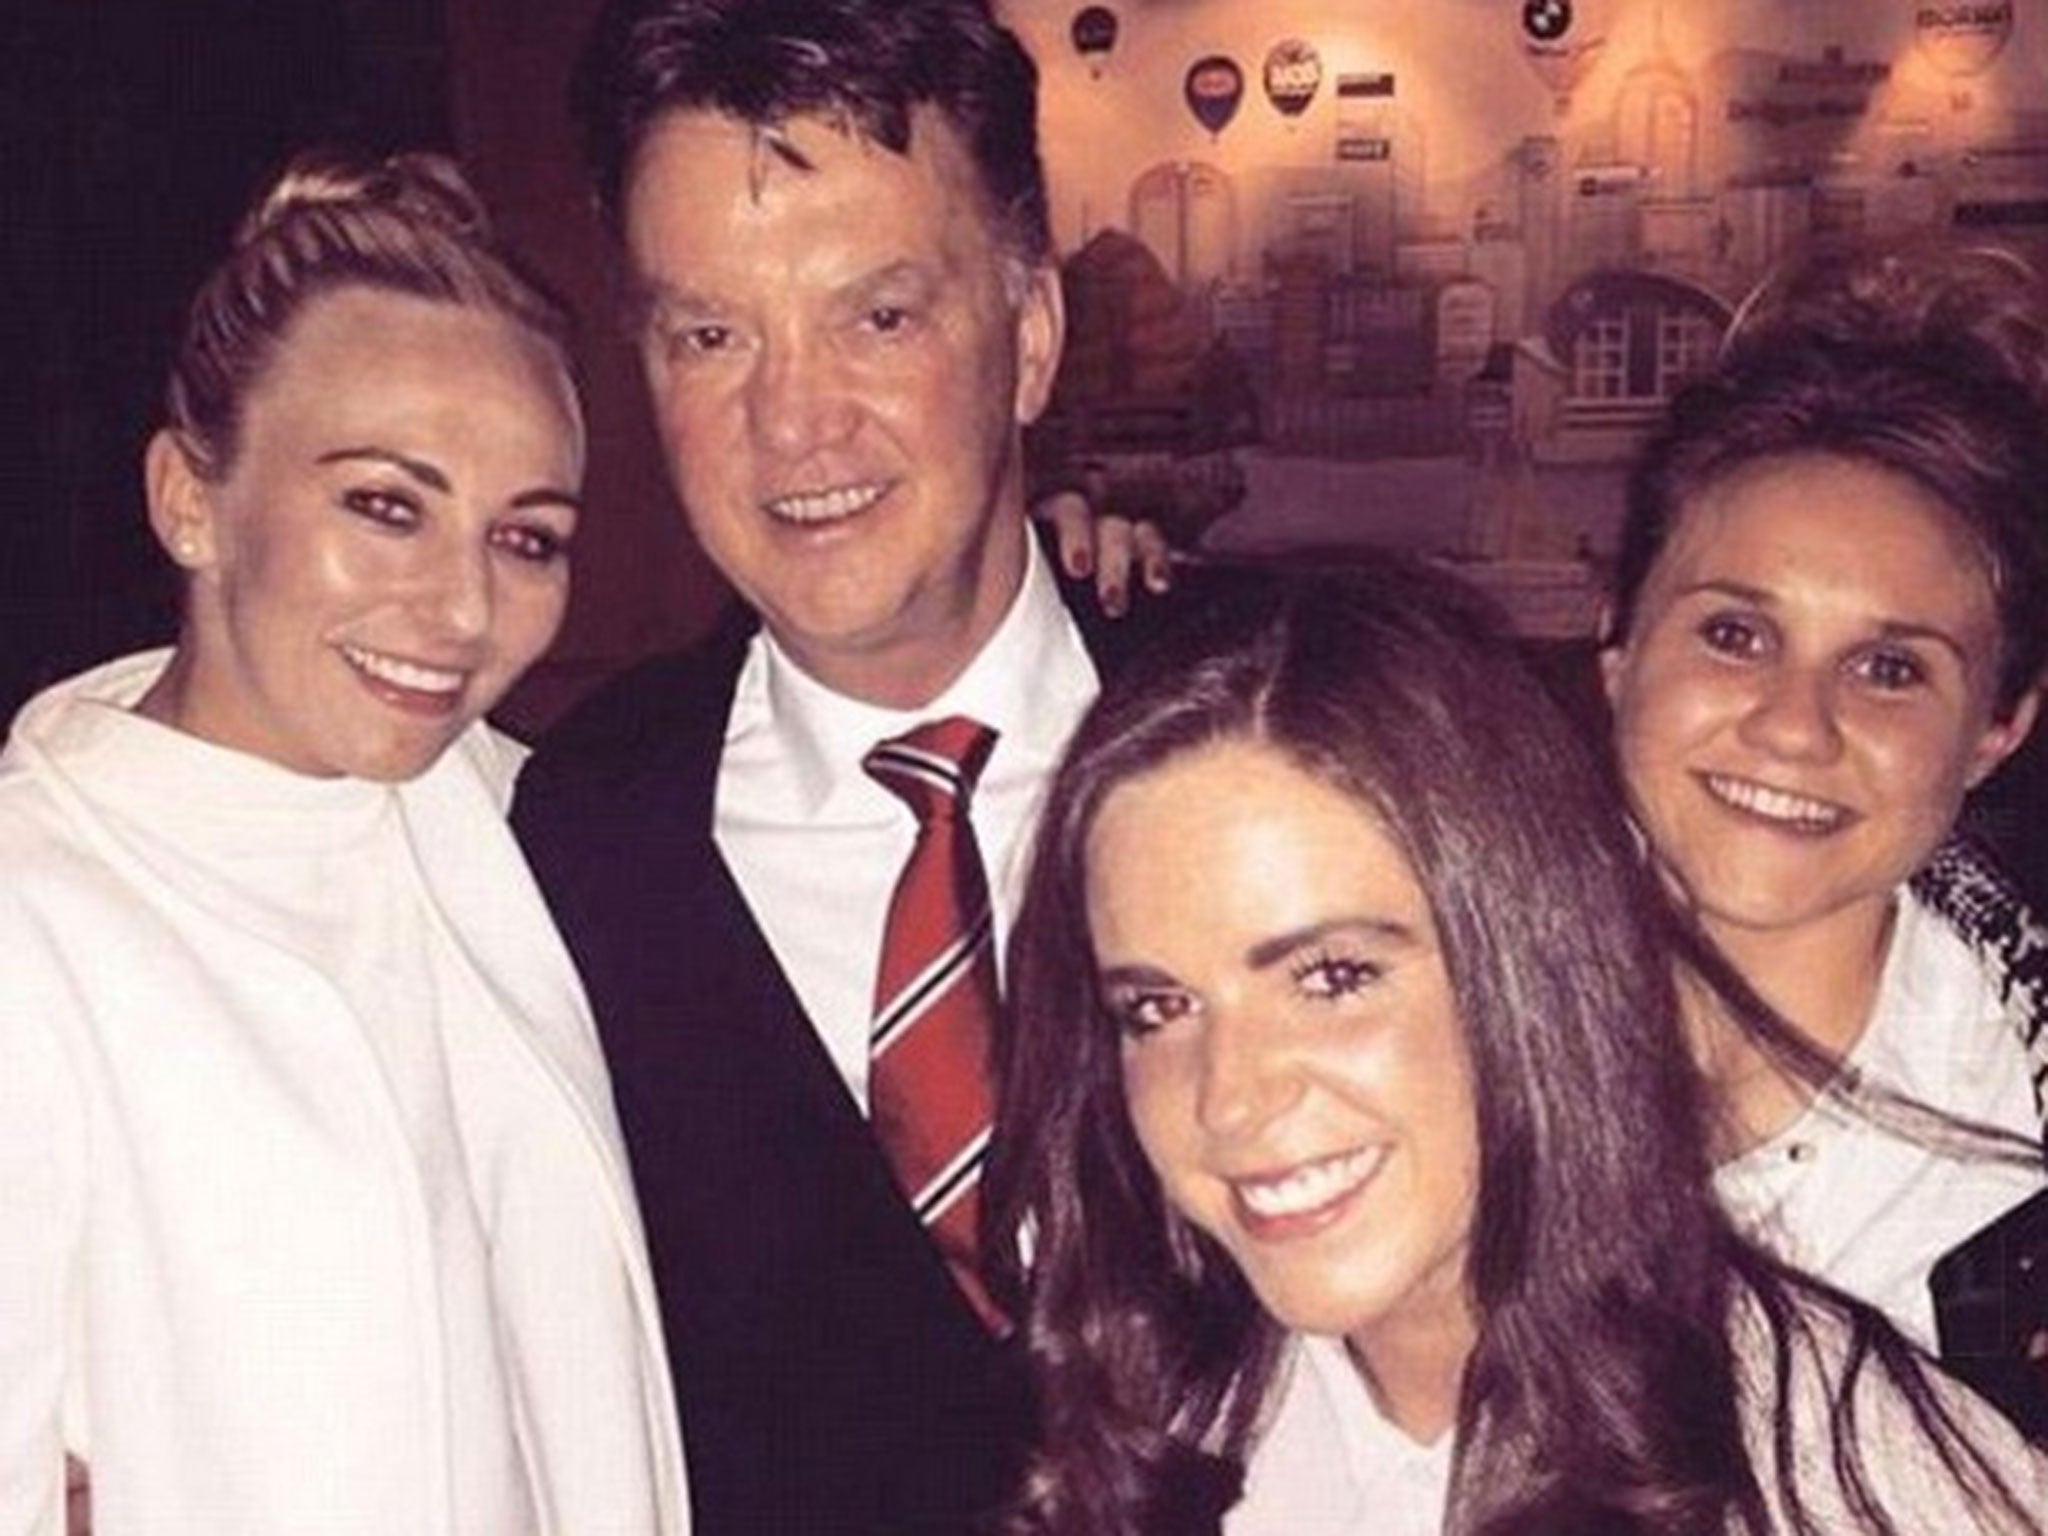 Louis van Gaal with Manchester City women's players Toni Duggan (left) and Isobel Christiansen (right). Plus Everton player Michelle Hinnigan (front)